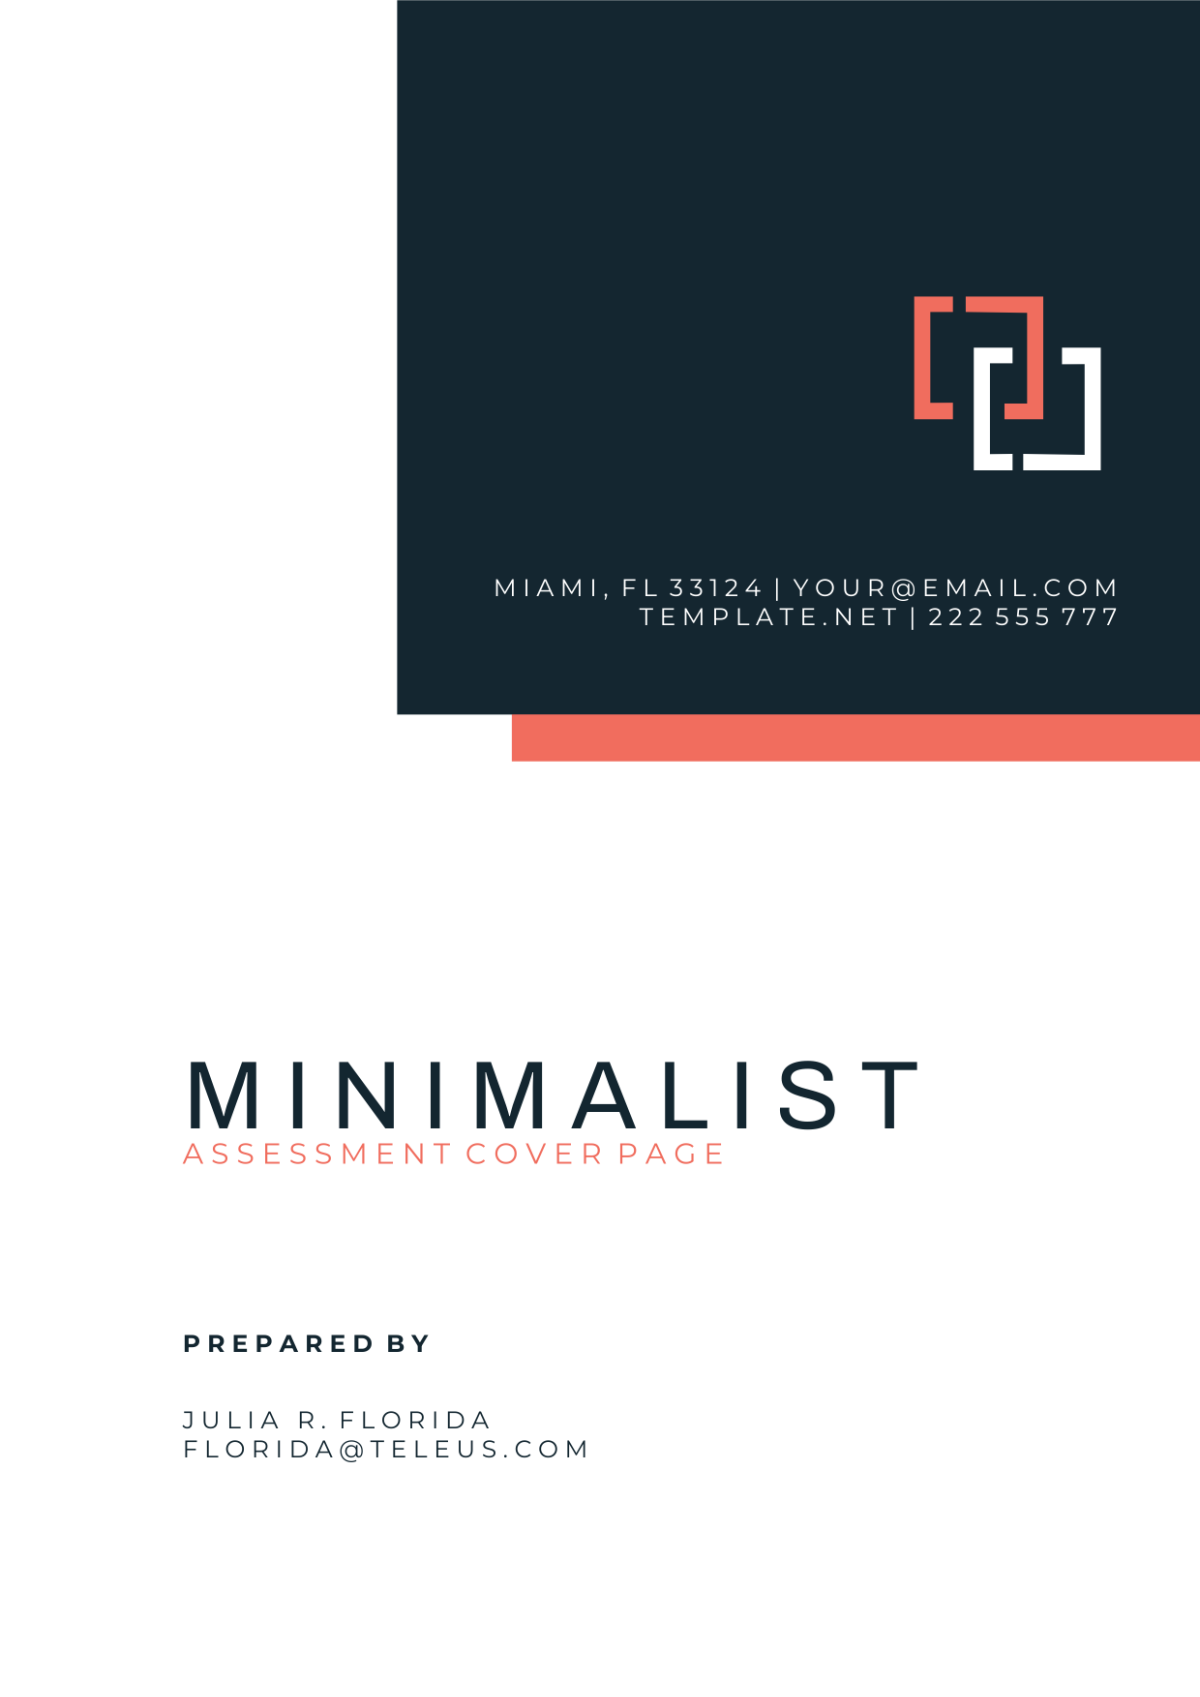 Minimalist Assessment Cover Page